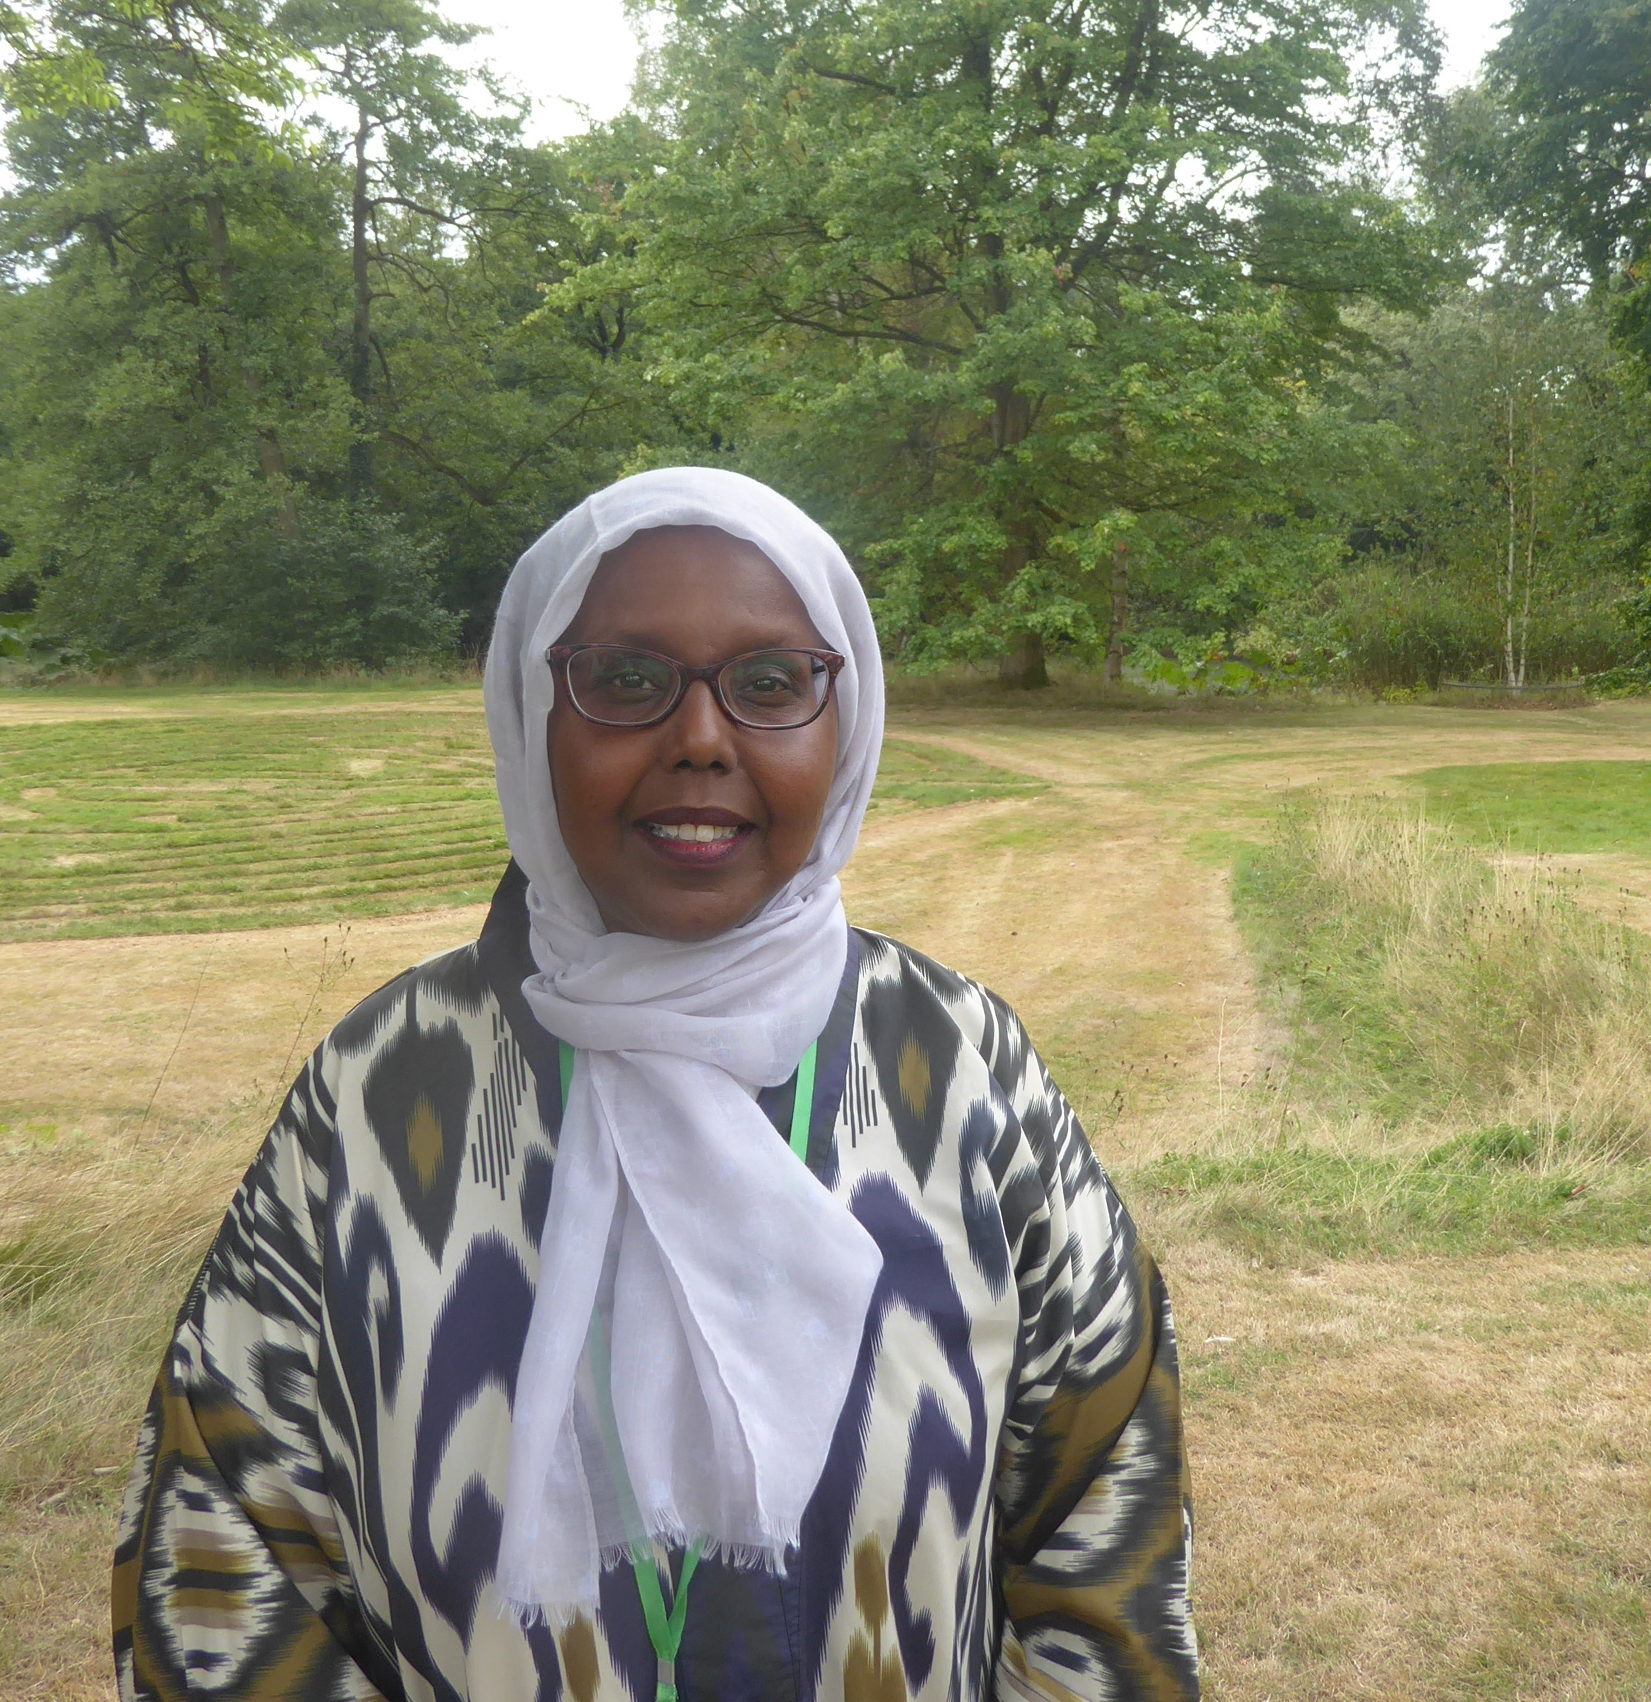 Dr. Muna Ismail, Programme Manager of RRB spoke at the event about her own experience arriving in the UK from Somalia. 